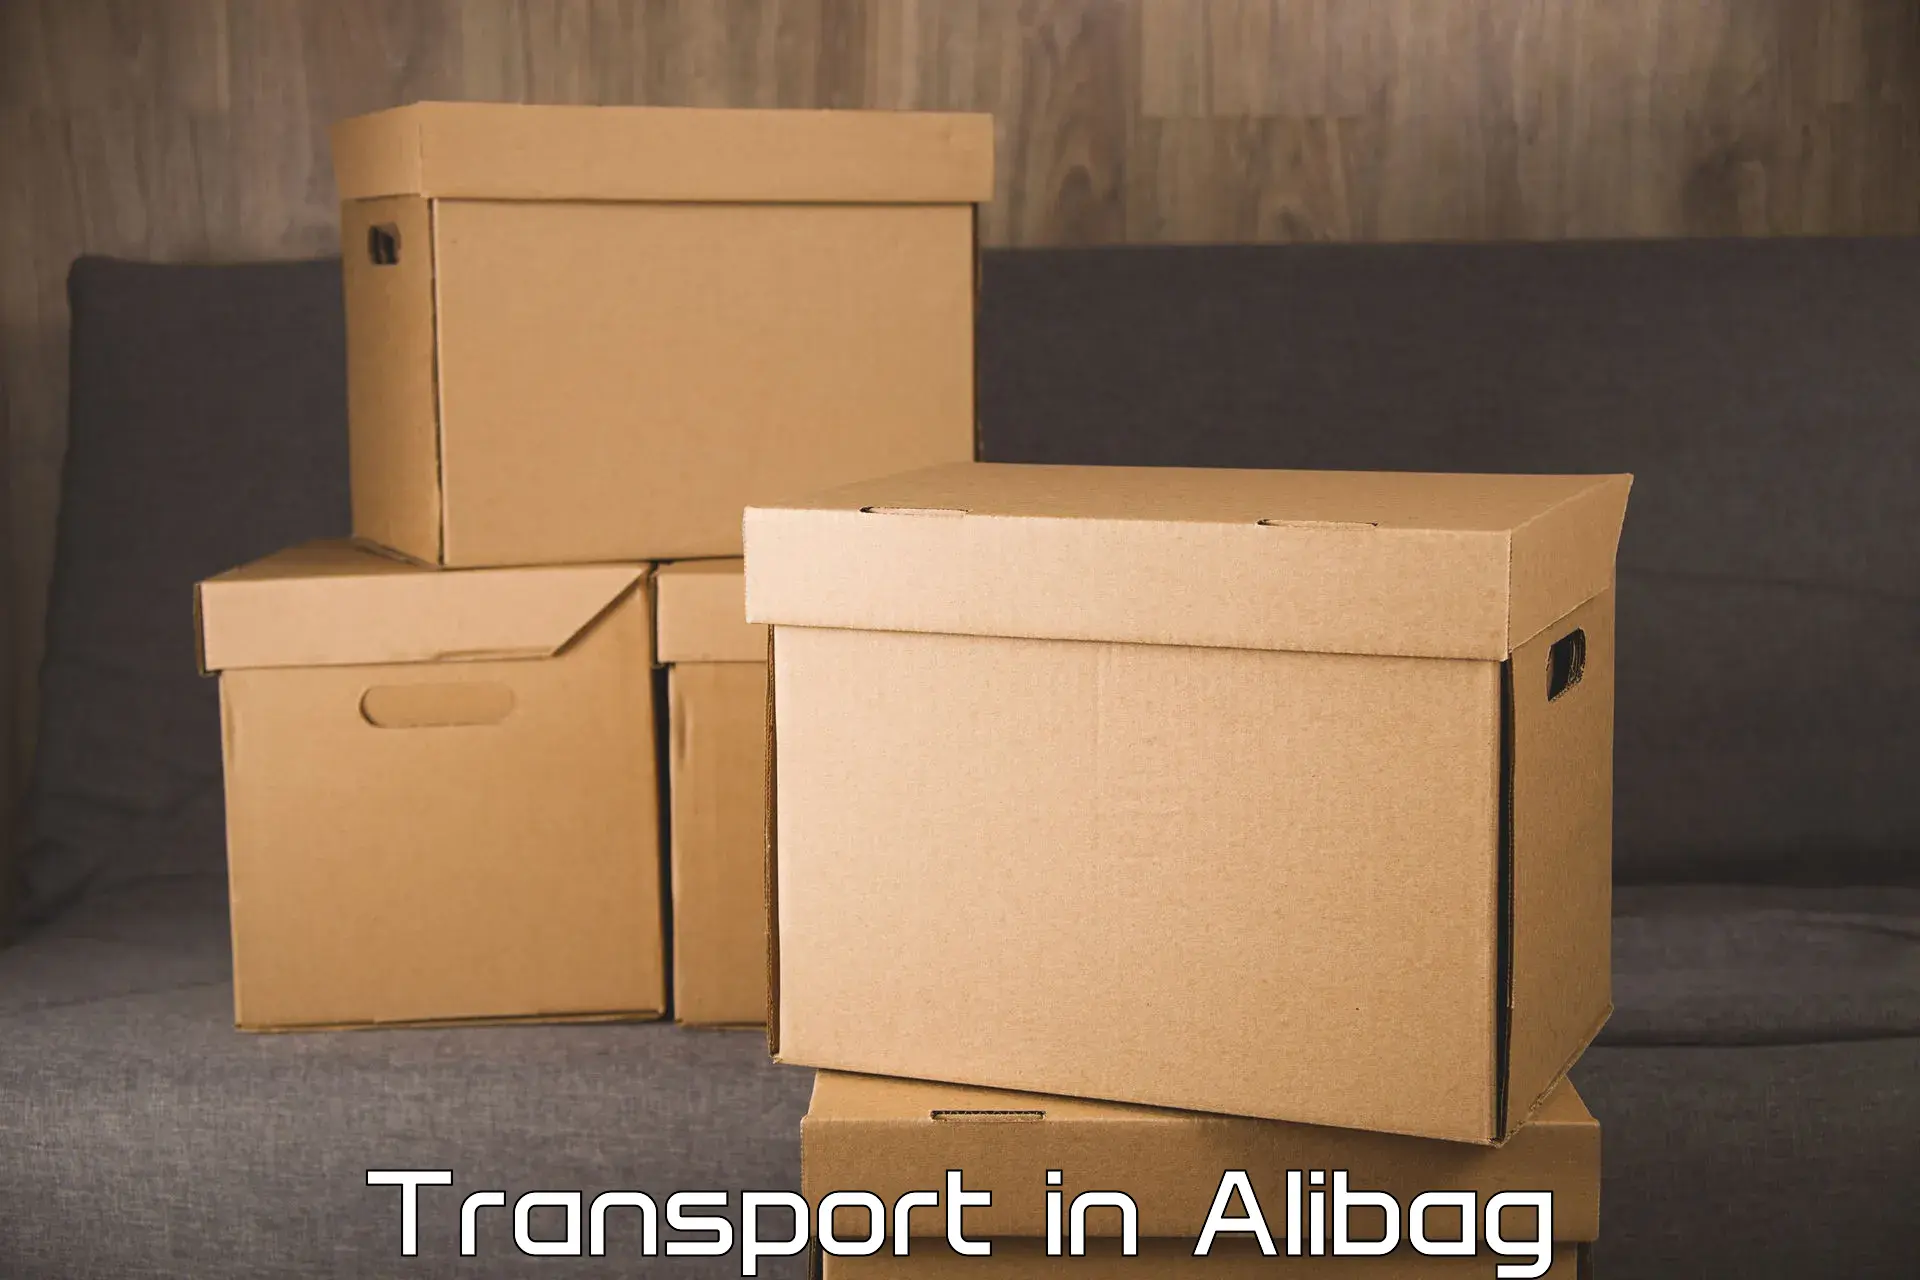 Air freight transport services in Alibag